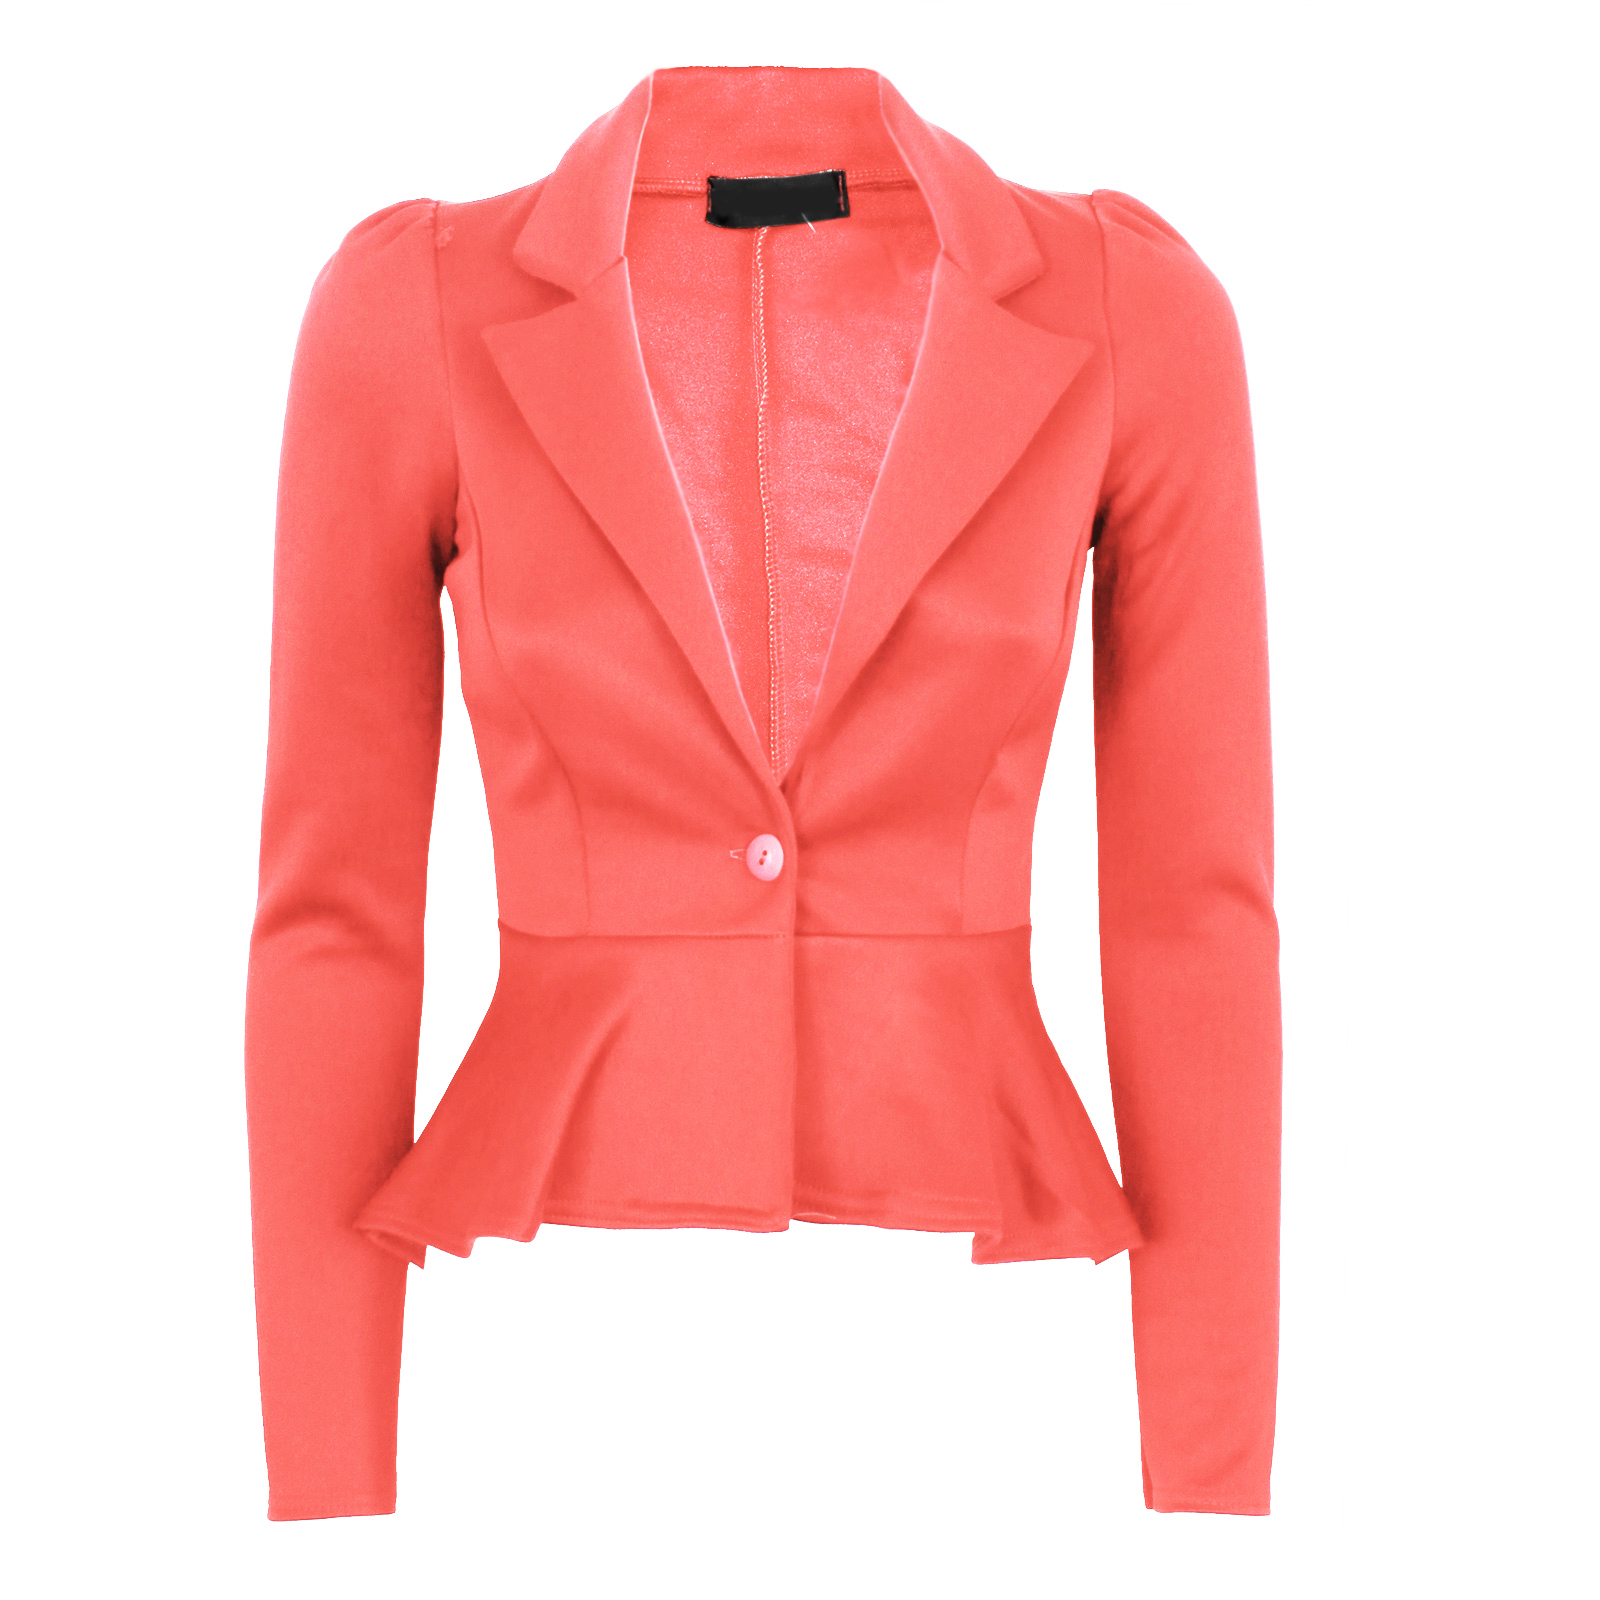 Collection Coral Blazer Womens Pictures - Reikian